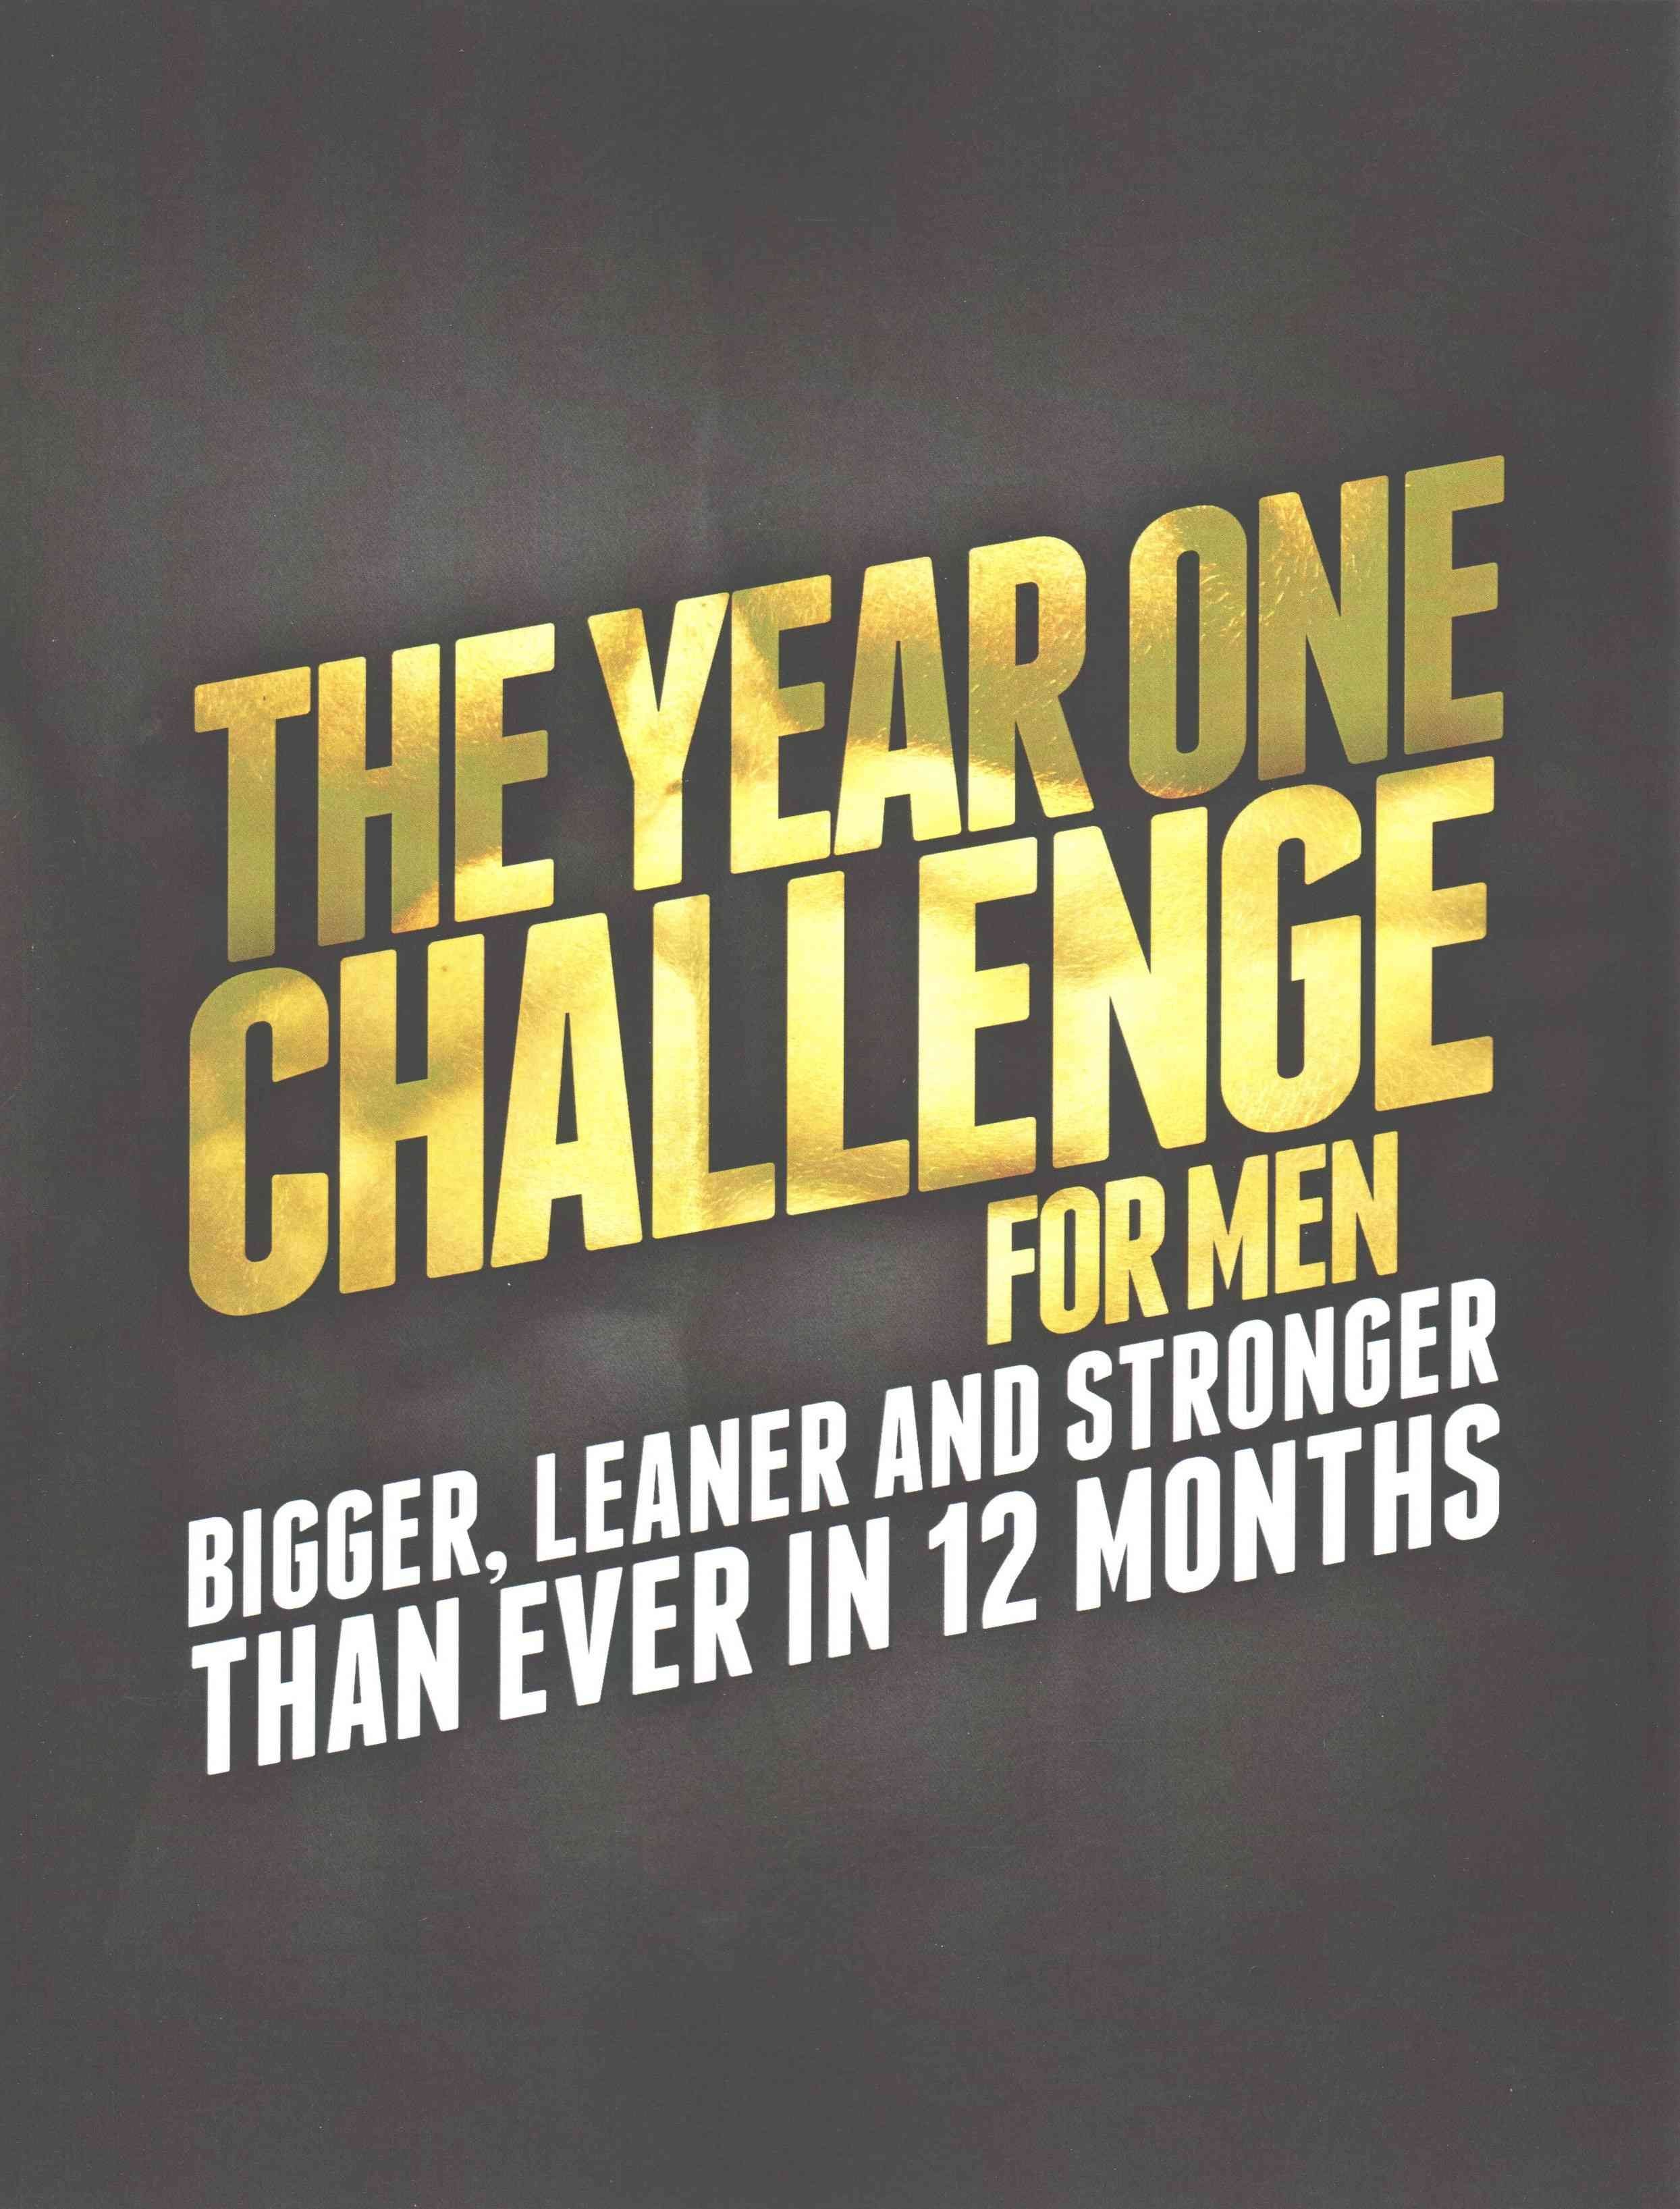 the year one challenge